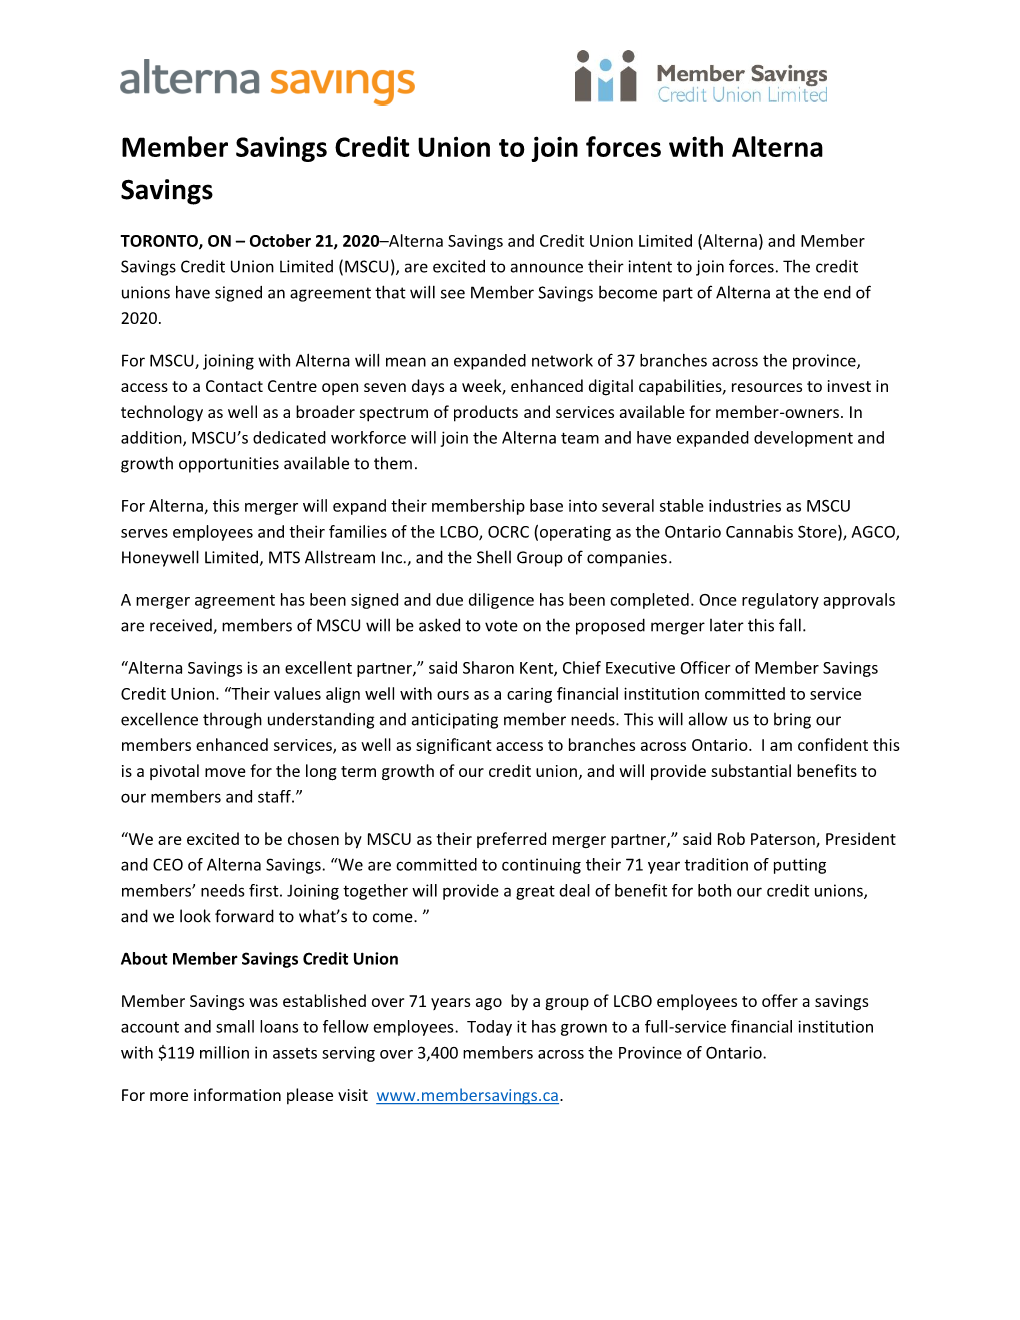 Member Savings Credit Union to Join Forces with Alterna Savings